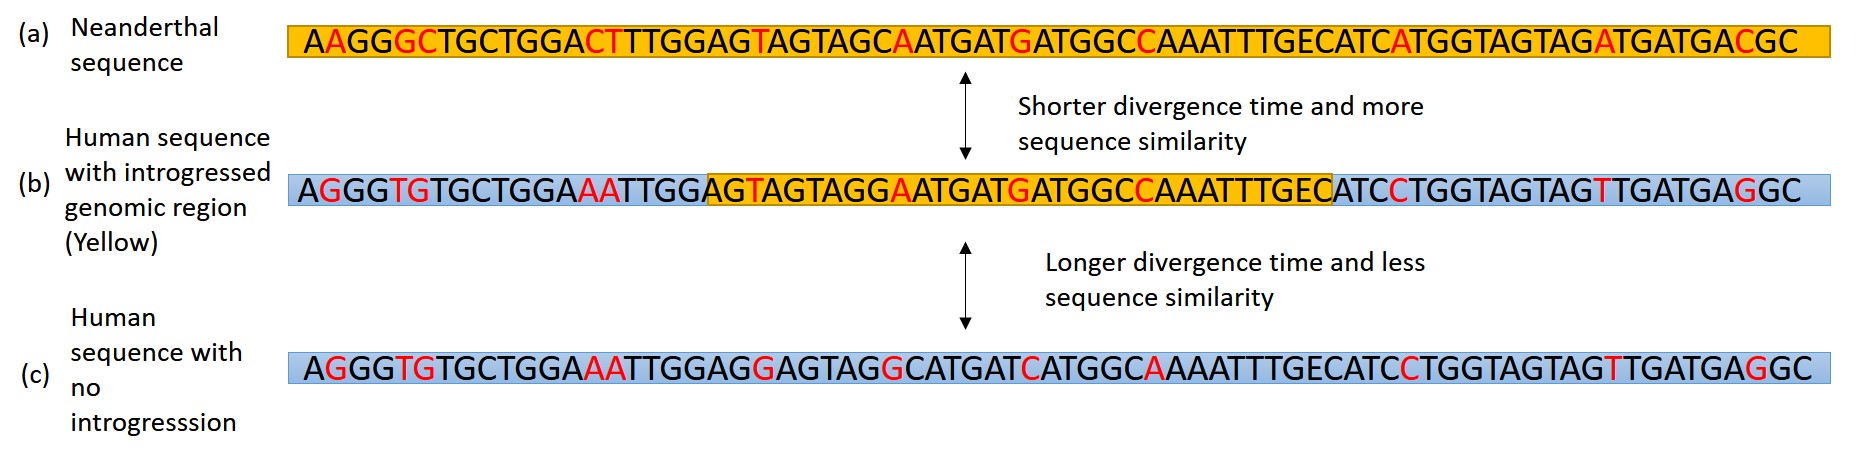 An illustration of a (b) introgressed region (in yellow) in a modern human genome and how it compares to the same segment in a (c) modern human with no introgression and an (a) Neanderthal sequence.